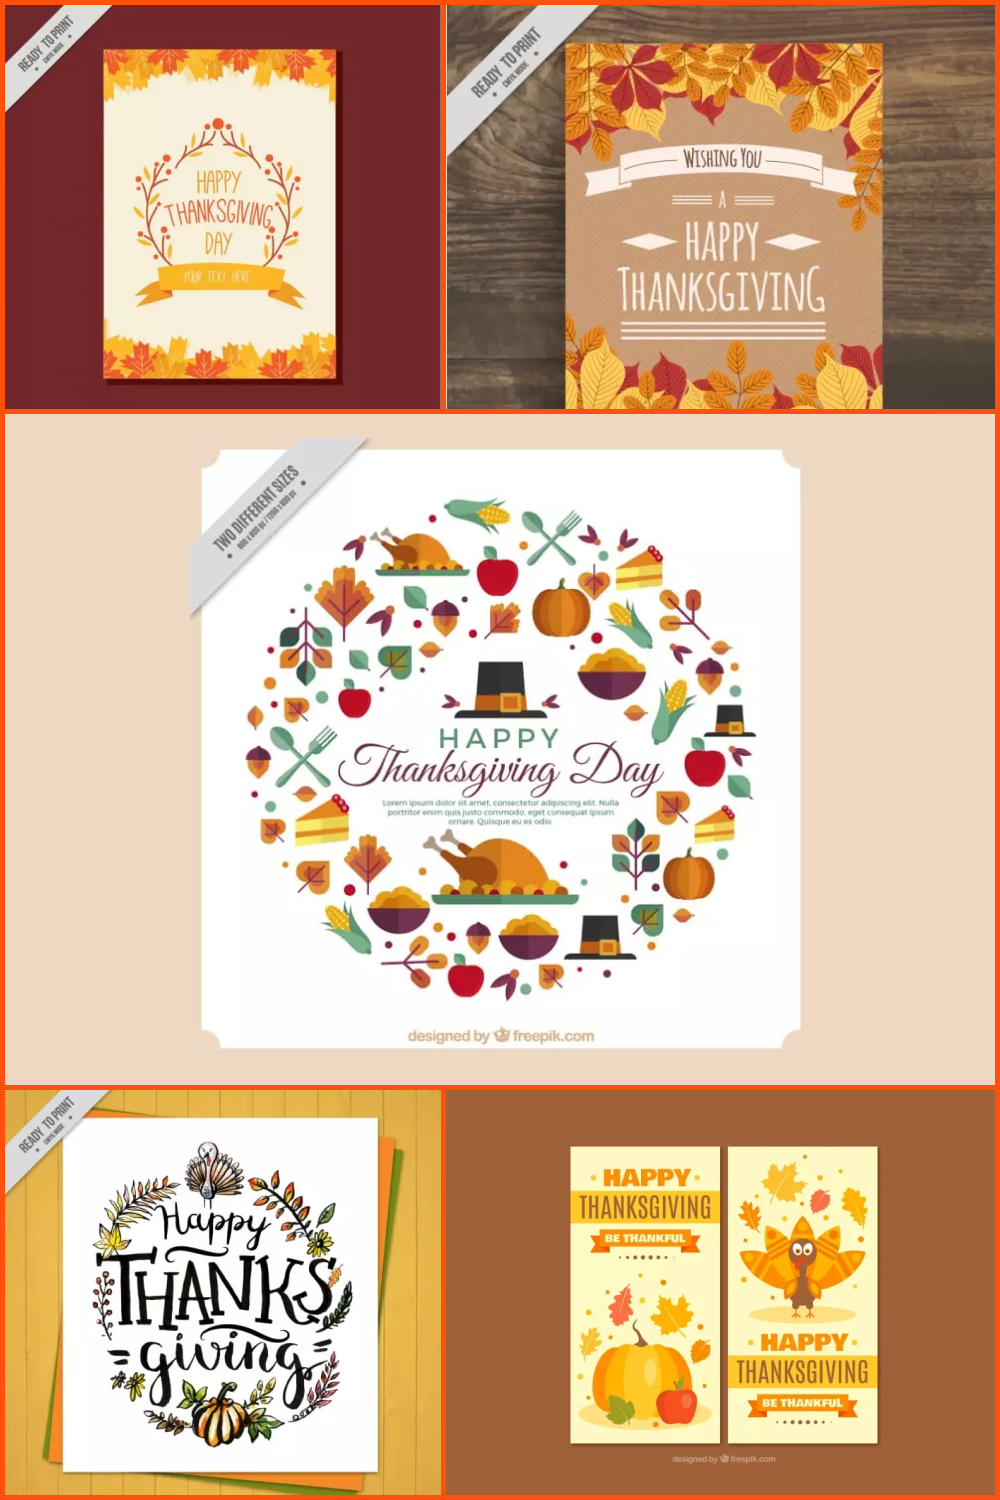 Collage of colorful thanksgiving cards with turkeys and leaves.